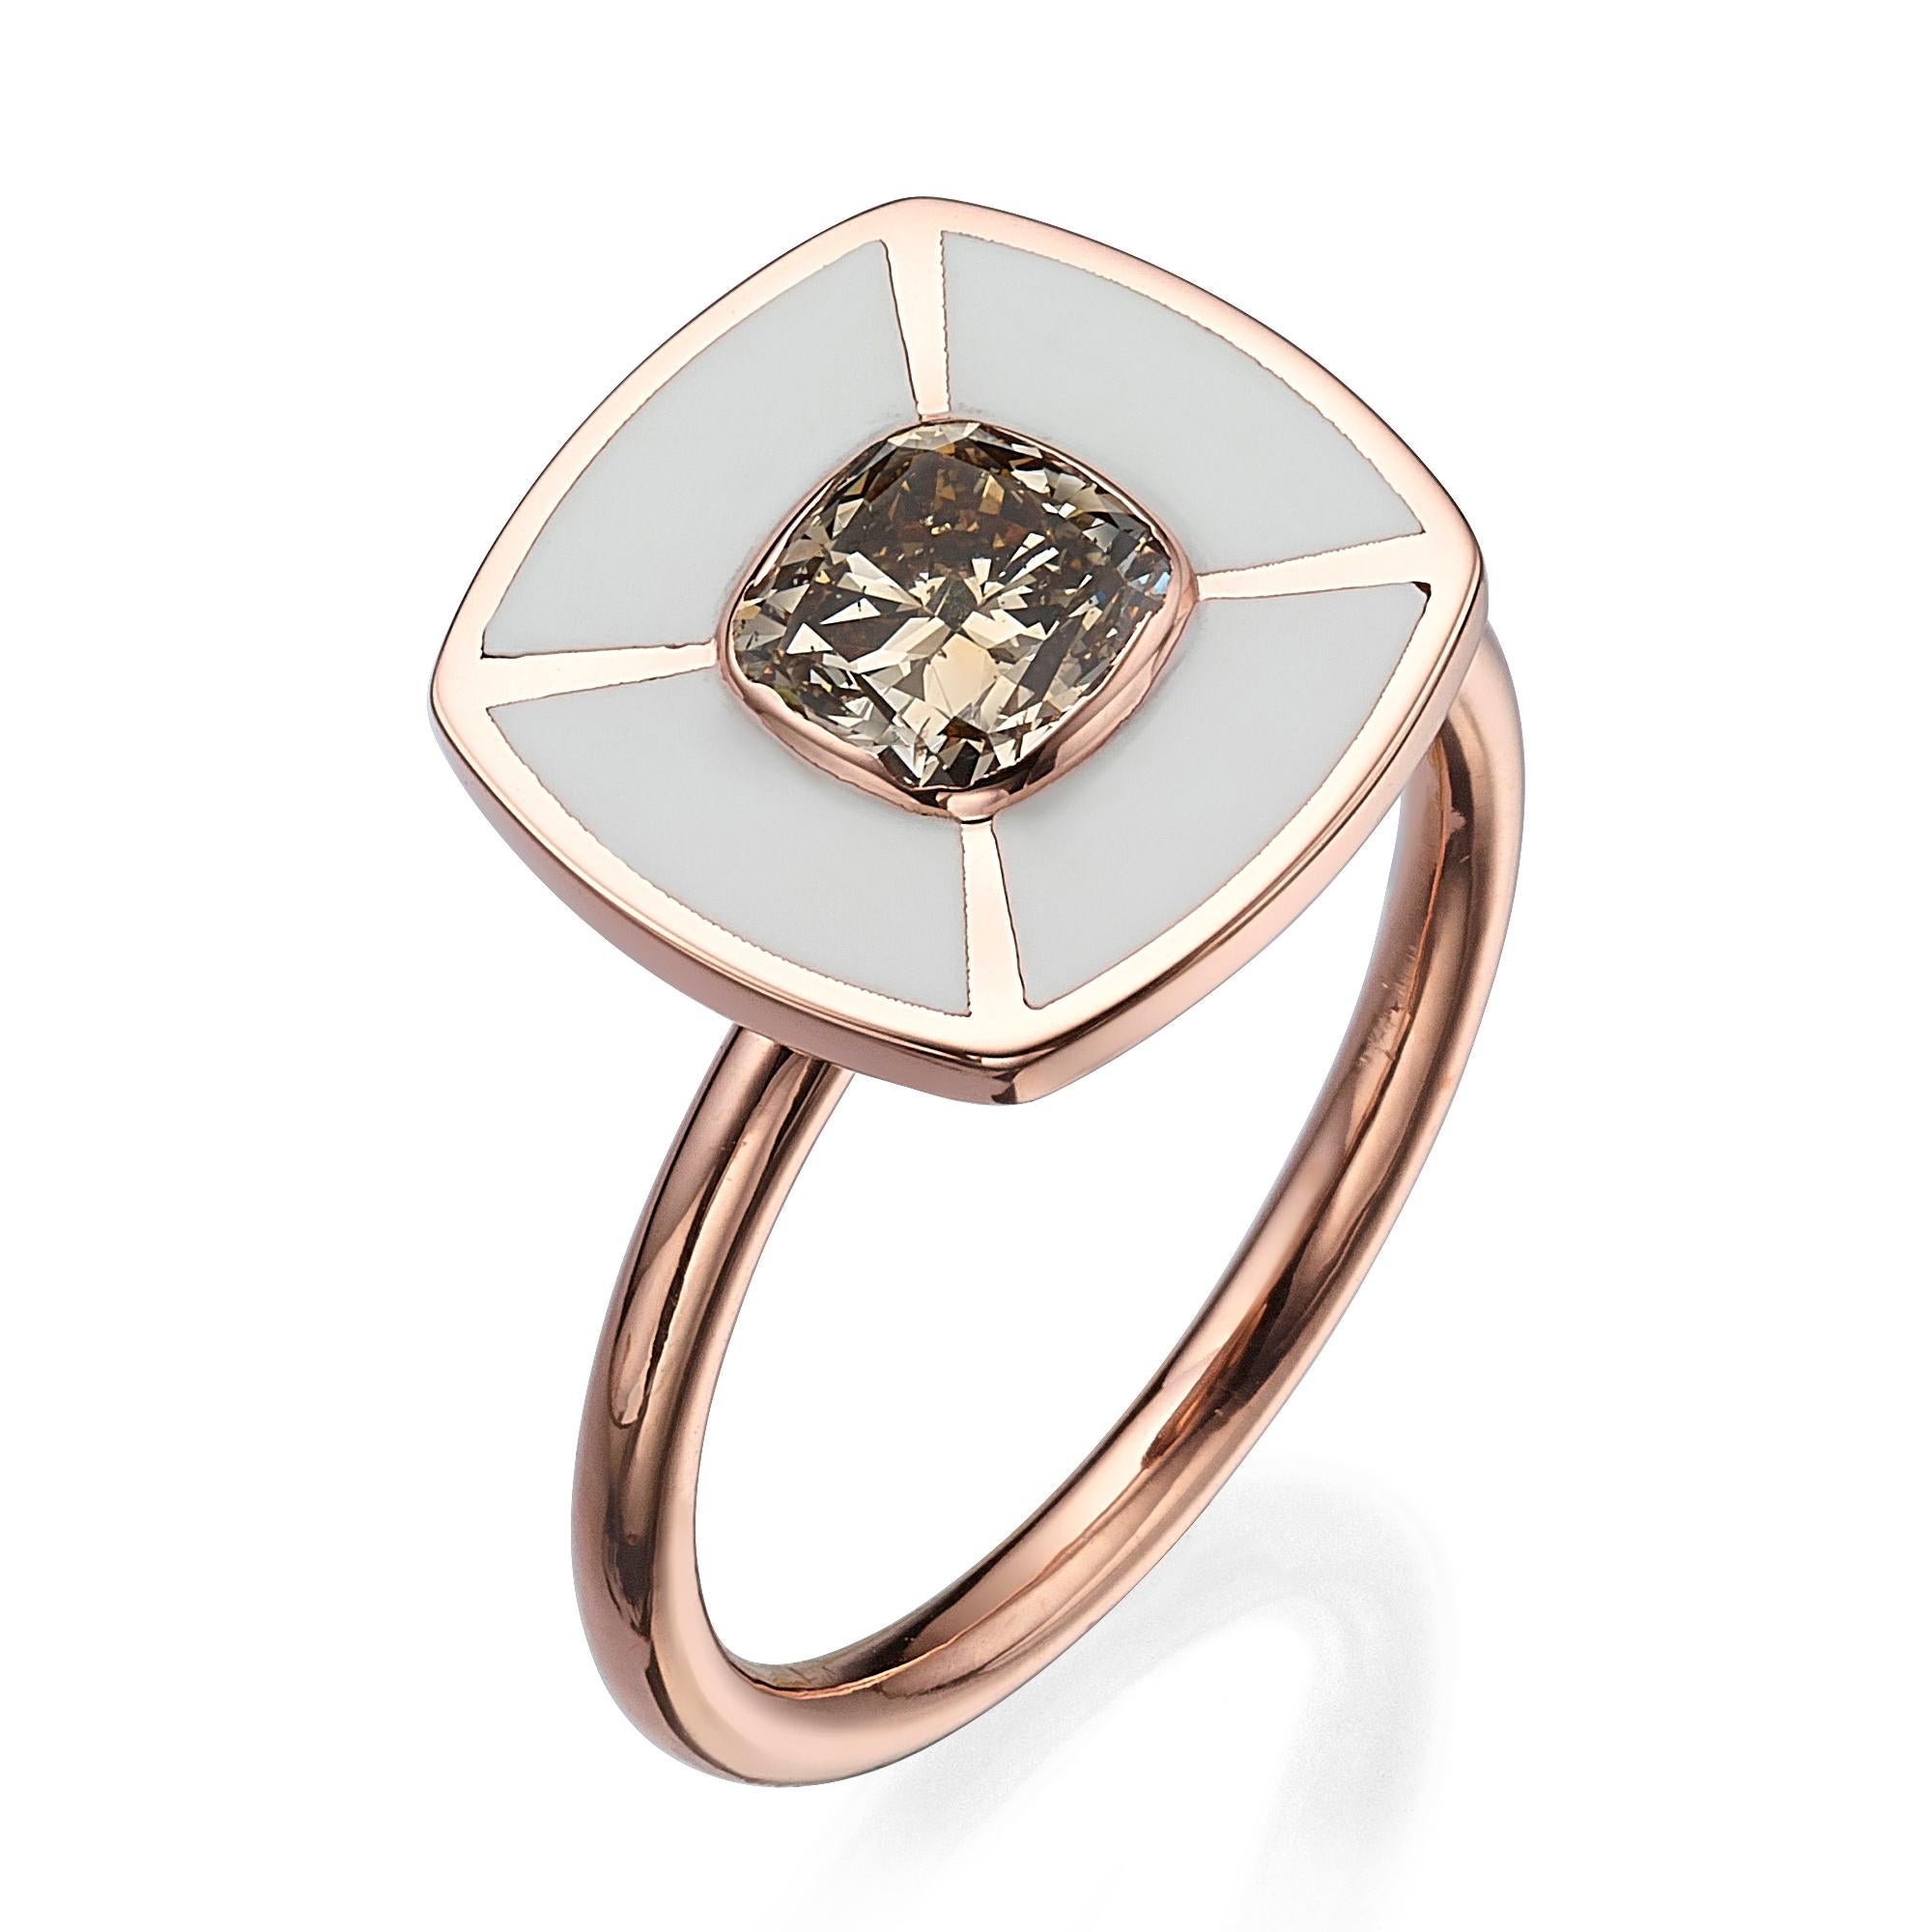 SKU# 4006134

Introducing an exquisite piece of jewelry that will captivate your heart - an 18k Cushion-Shaped Rose Gold Diamond Ring with White Enamel. This stunning ring features a mesmerizing cushion-cut Champagne diamond as its center stone,